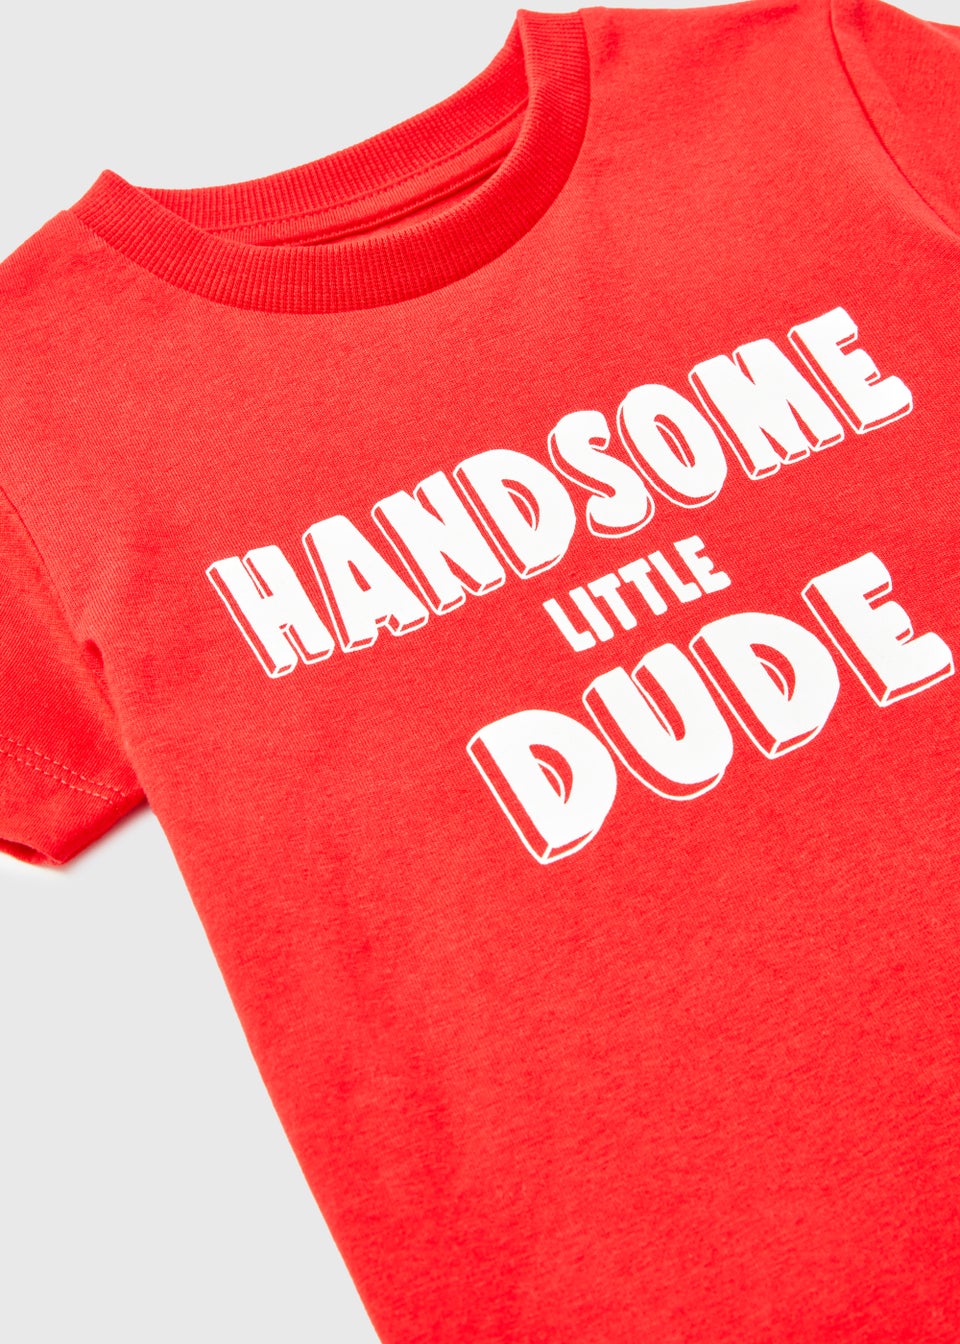 Boys Red Handsome Little Dude Print T-Shirt (1-7yrs)